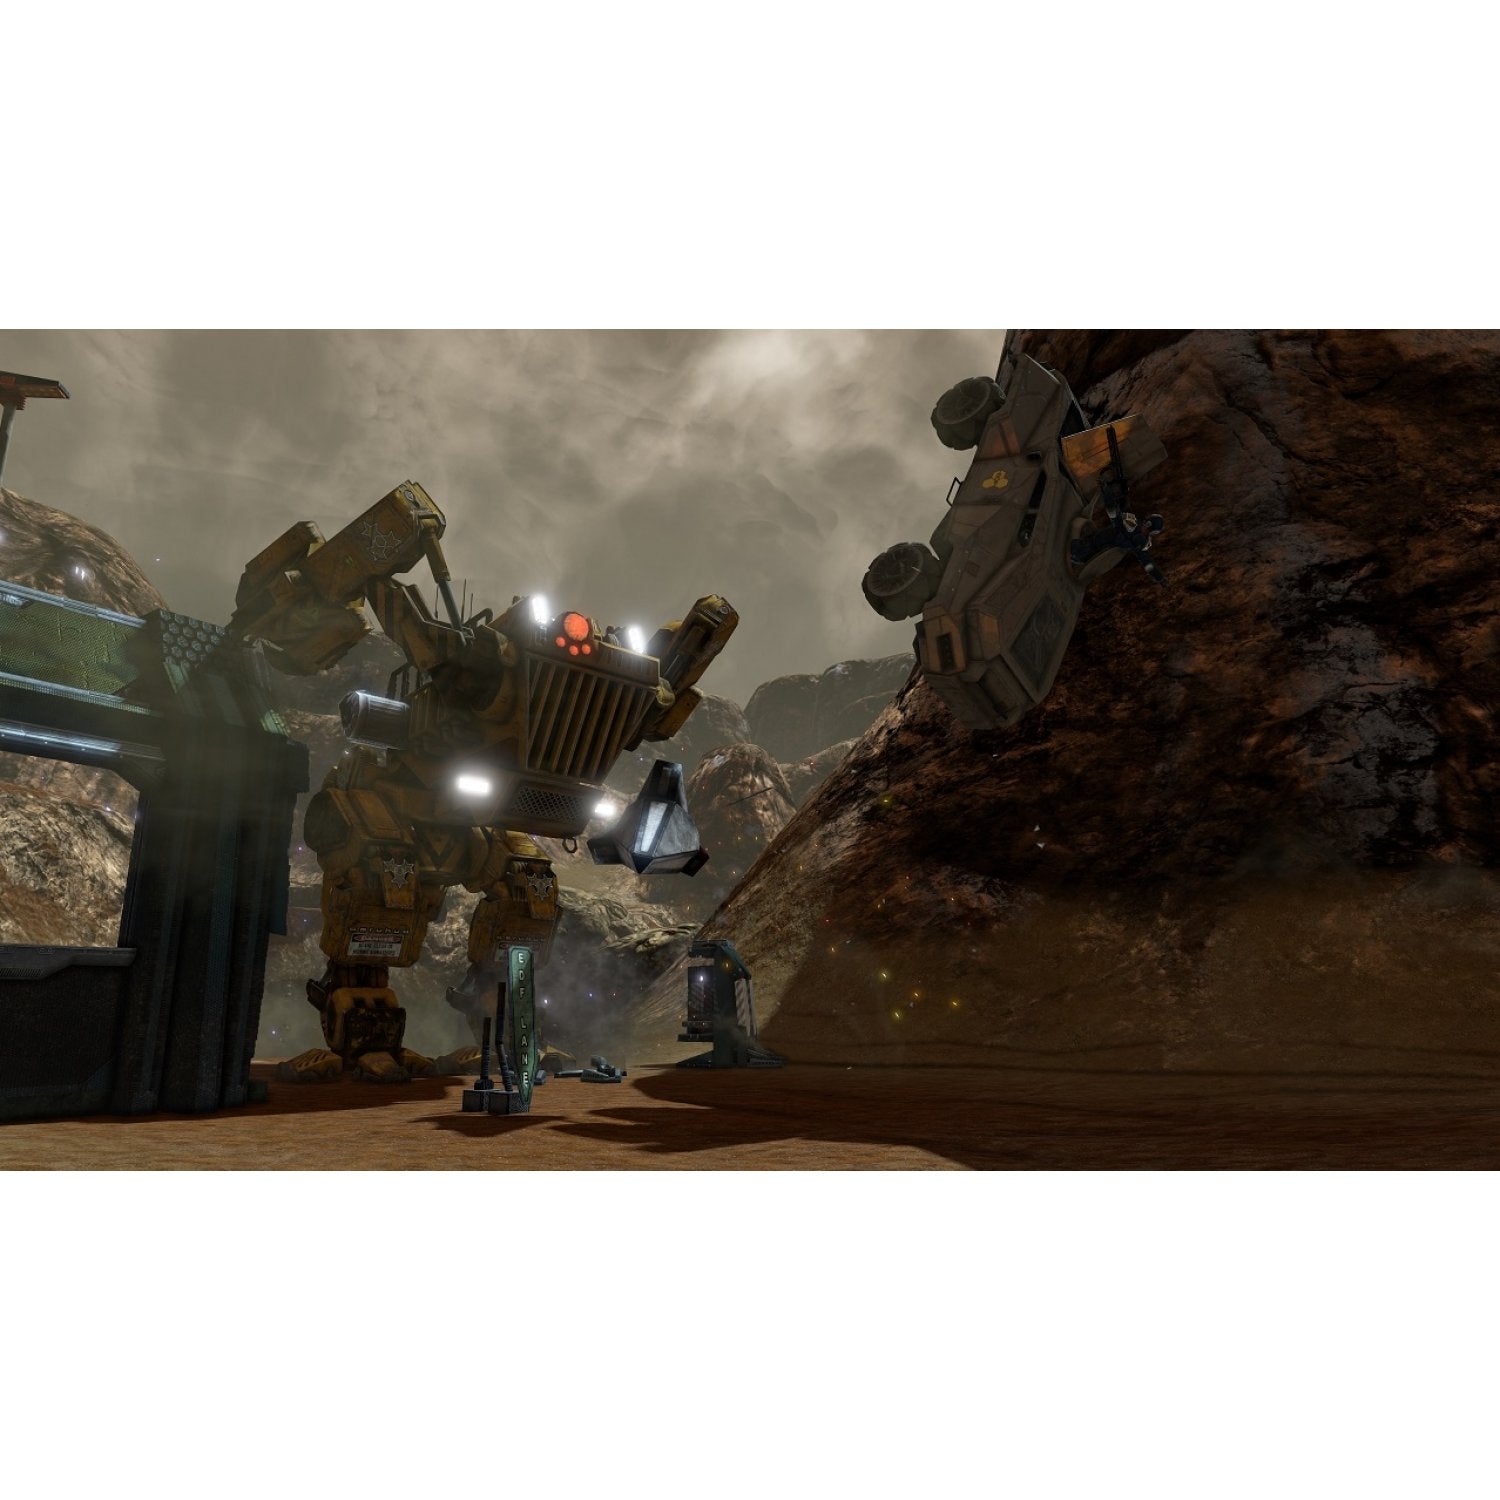 NSW Red Faction: Guerilla Re-Mars-tered